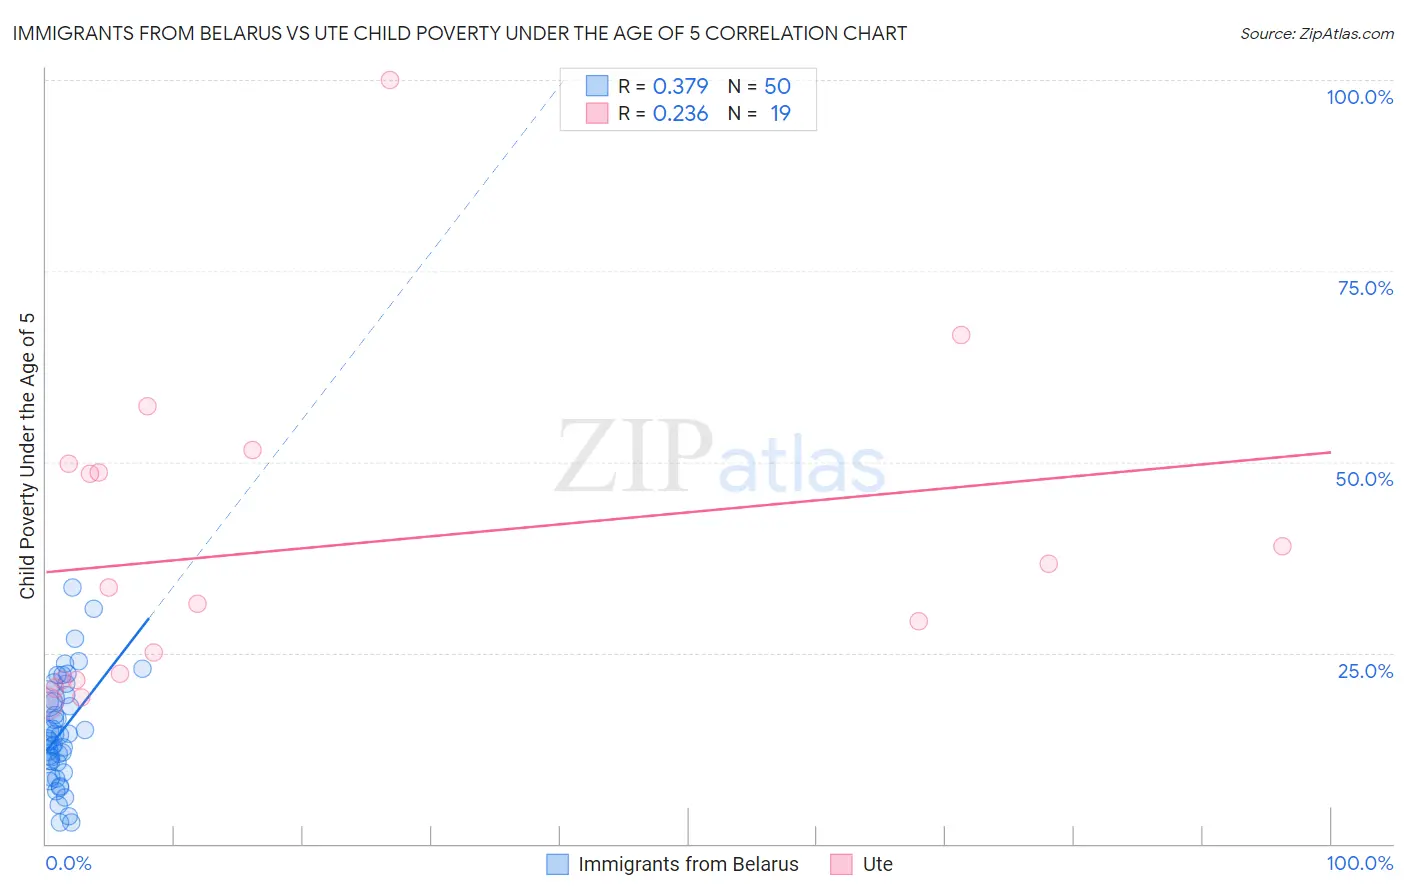 Immigrants from Belarus vs Ute Child Poverty Under the Age of 5